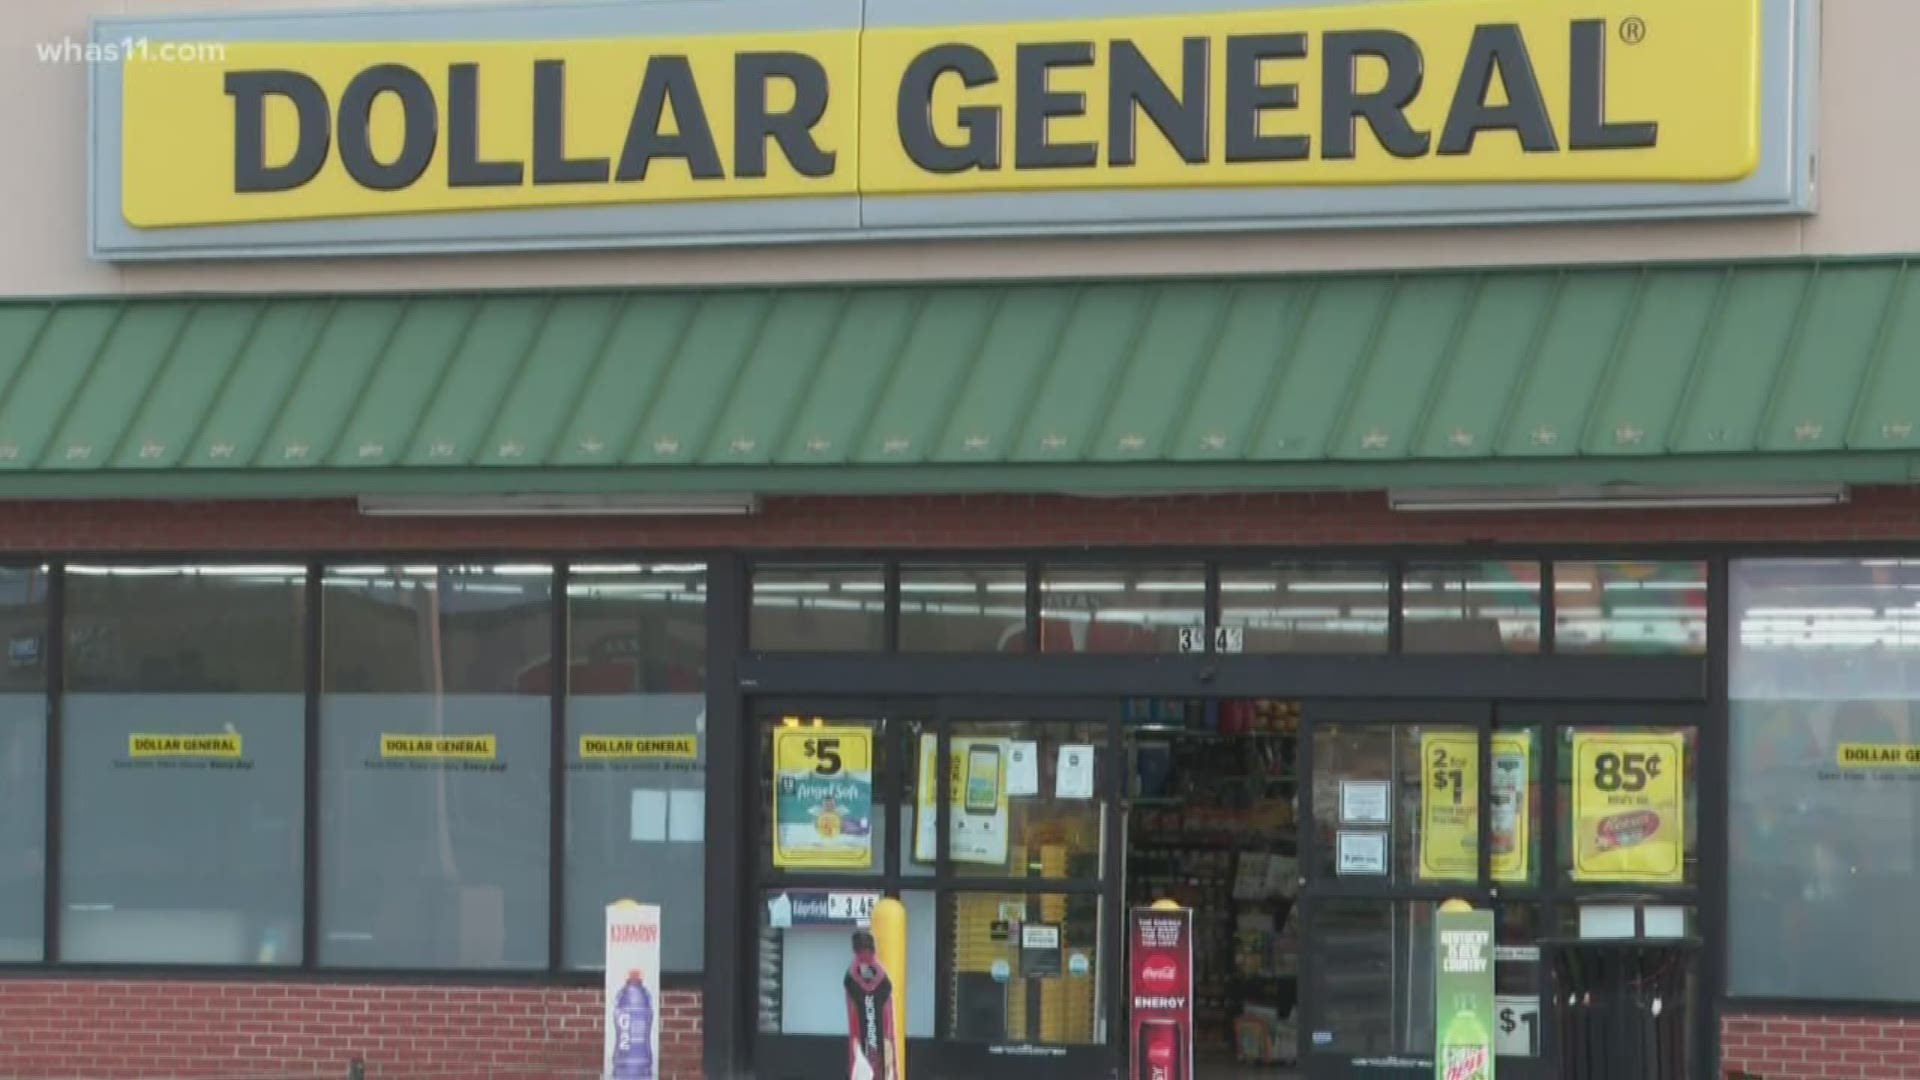 Kentucky's job market is expanding a bit after Dollar General confirmed it is adding two new distribution centers that will employ up to 400 people.